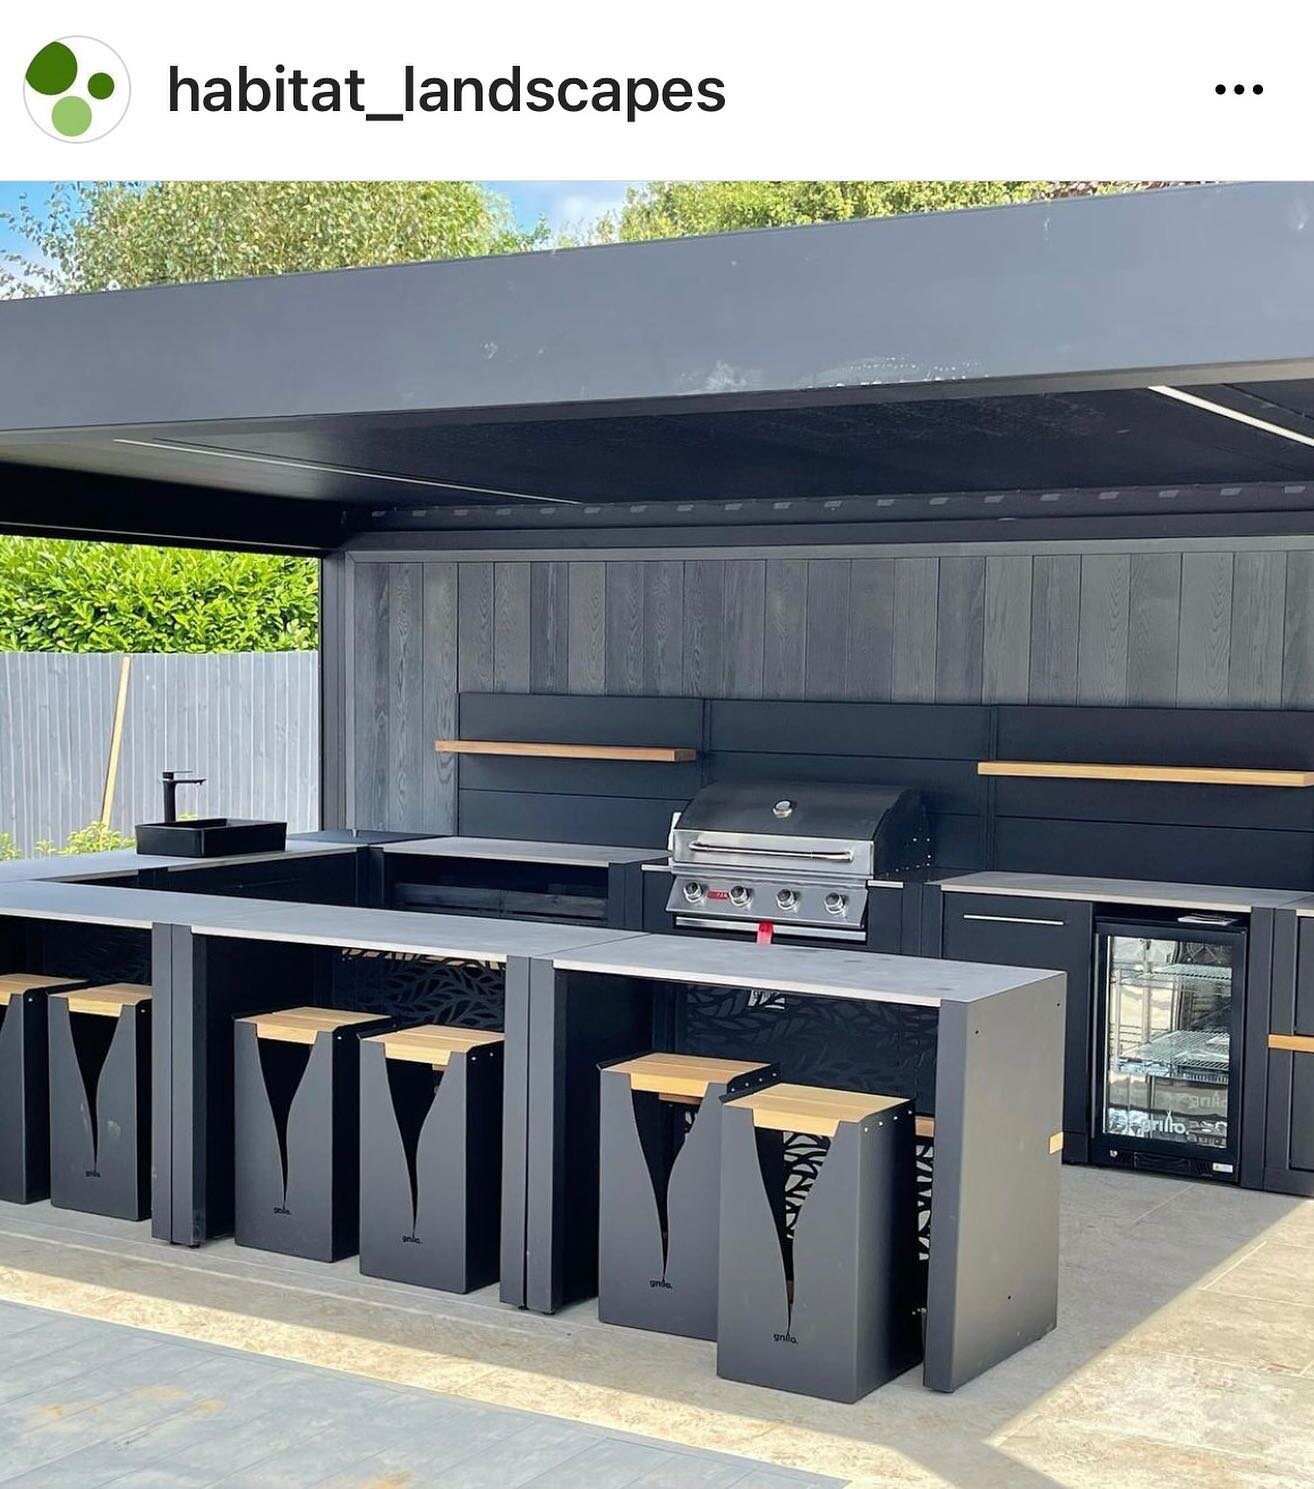 Huge pleasure to collaborate with the super @habitat_landscapes team and Mike Long on this one for the canopy and kitchen design and install. Looks fab doesn&rsquo;t it!?

#grillo vantage outdoor kitchen
#renson Camargue louvered canopy

#design #lan